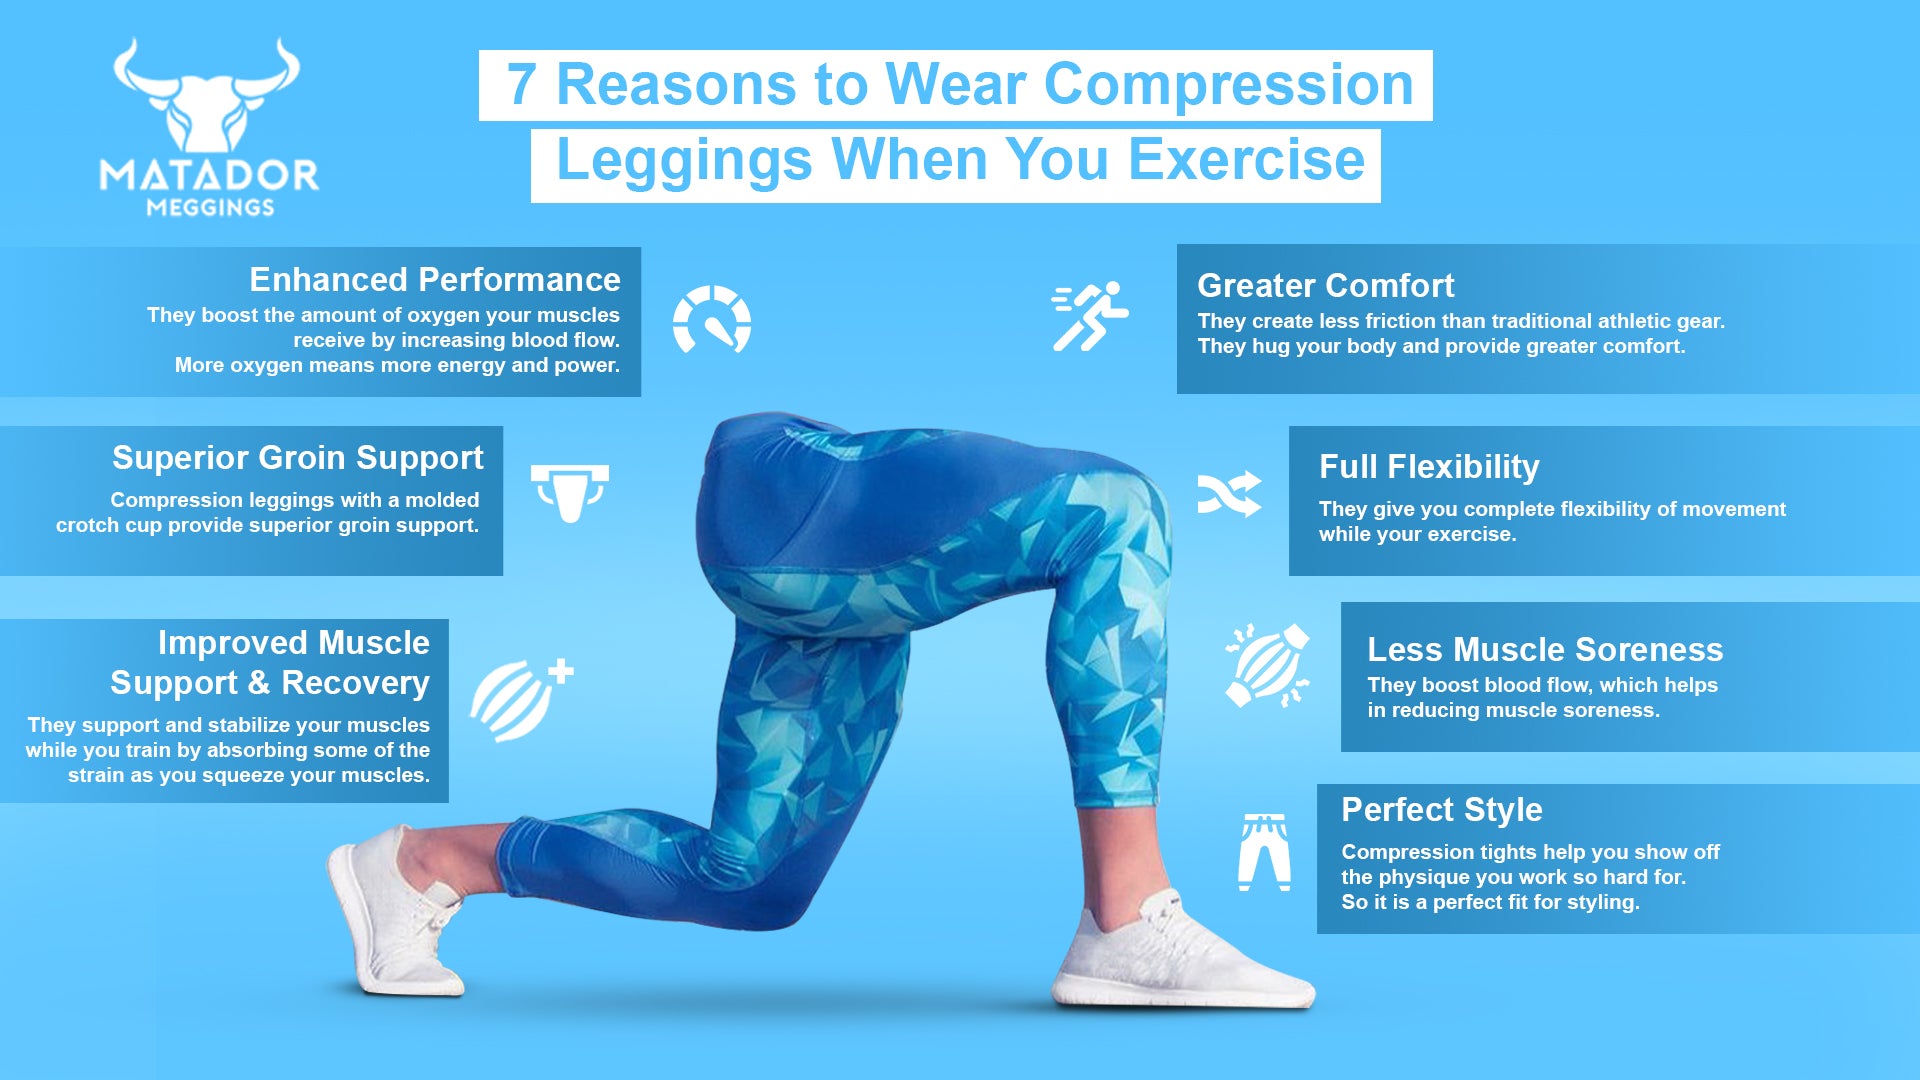 Men's Leggings For Working Out